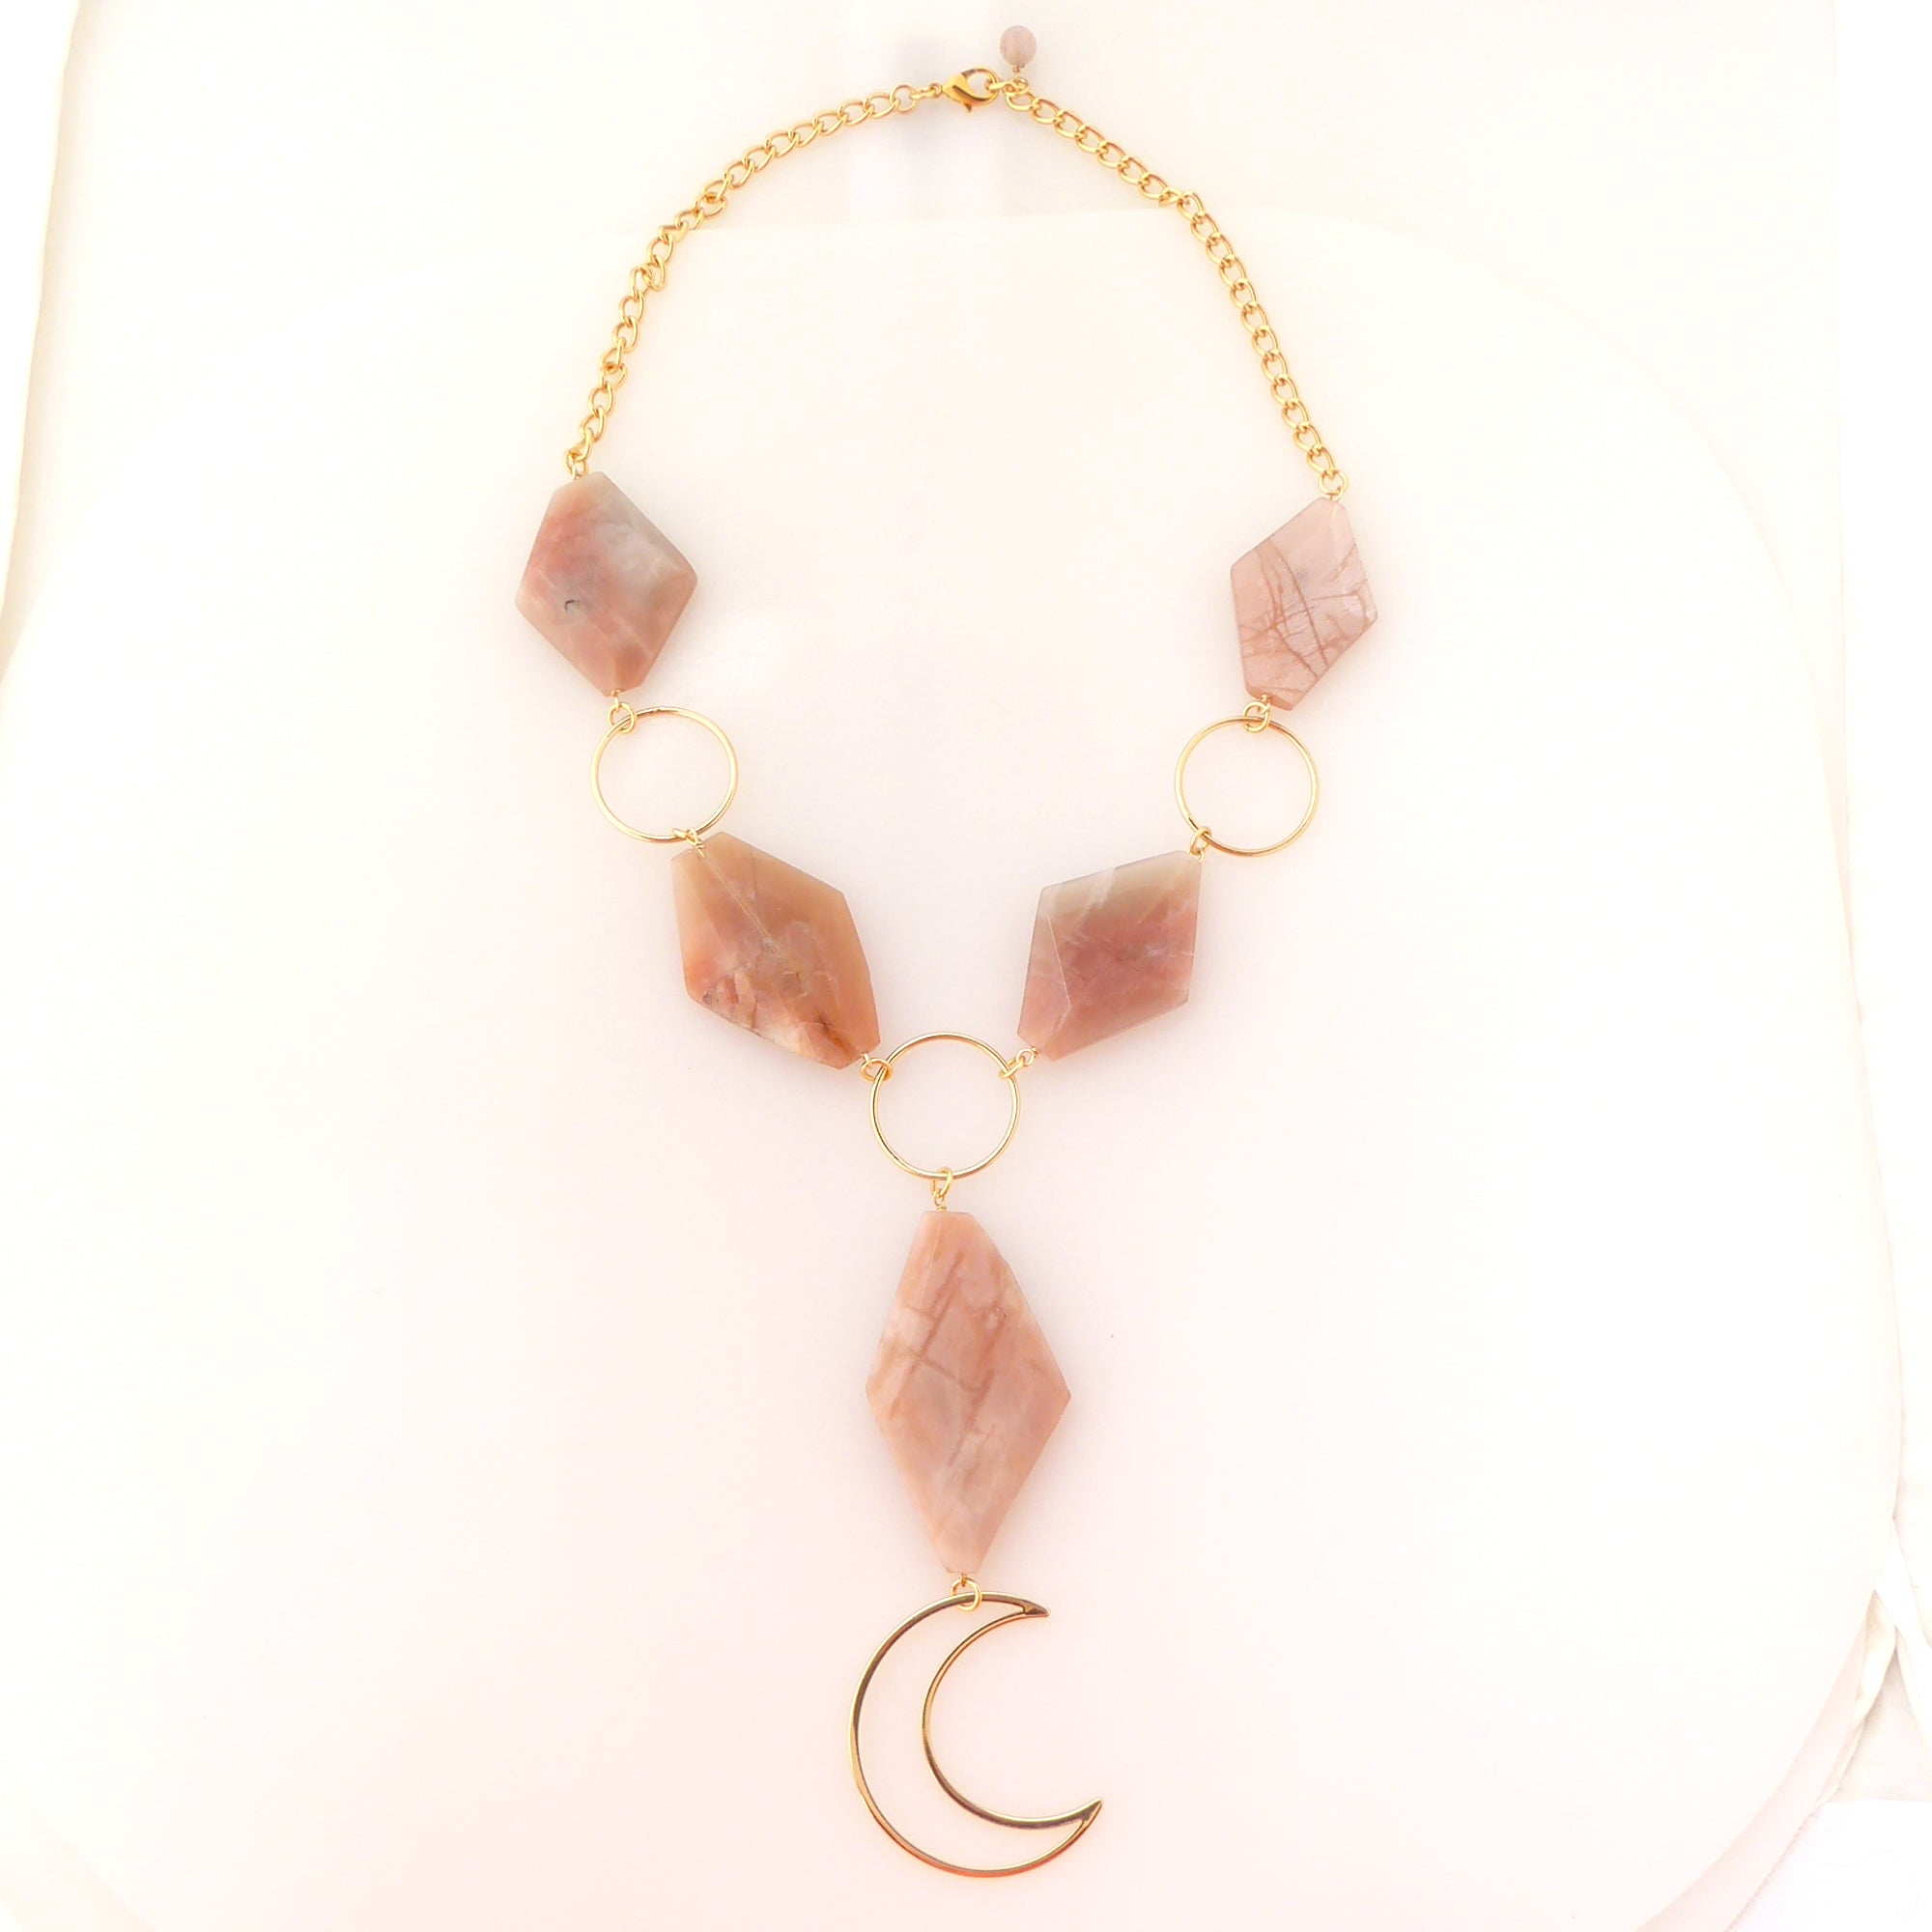 Peach moonstone moon necklace by Jenny Dayco 6